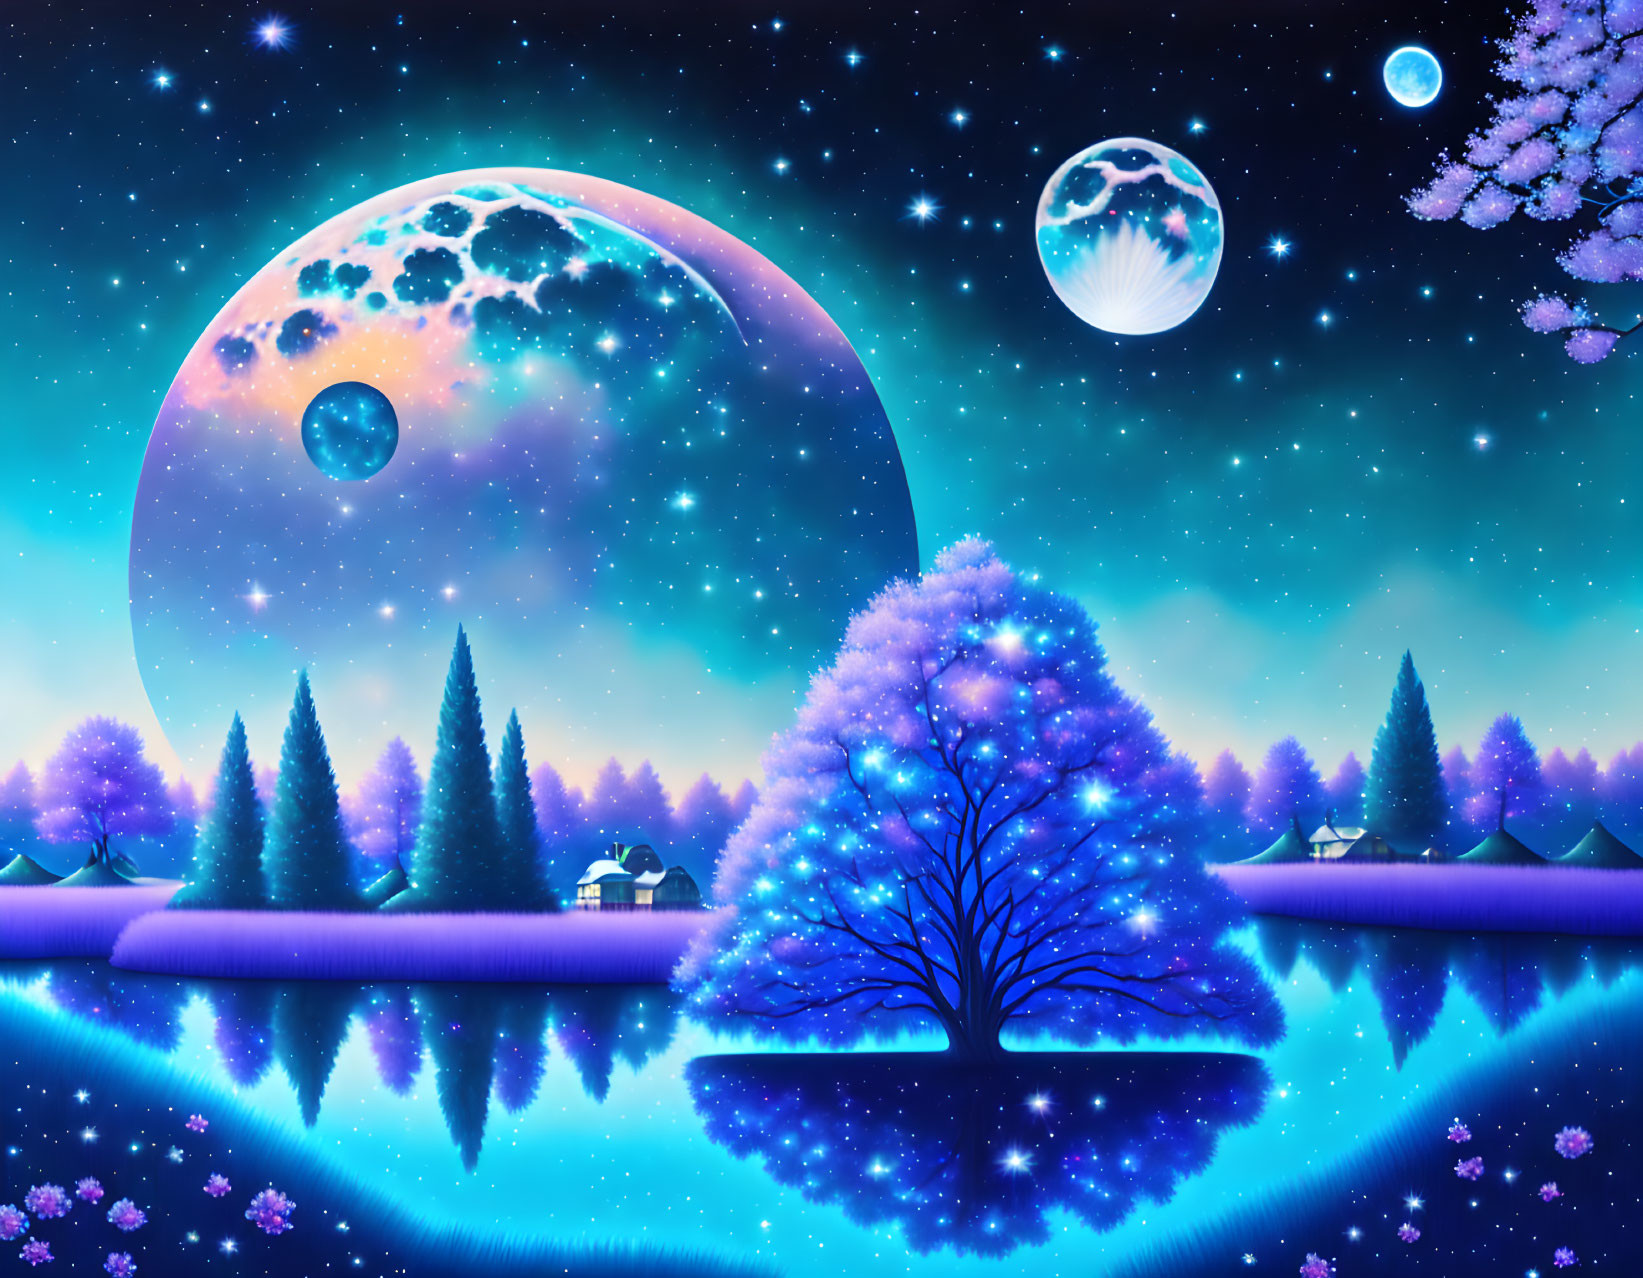 Detailed Night Sky with Large Moon, Reflective Lake, and Blossoming Trees